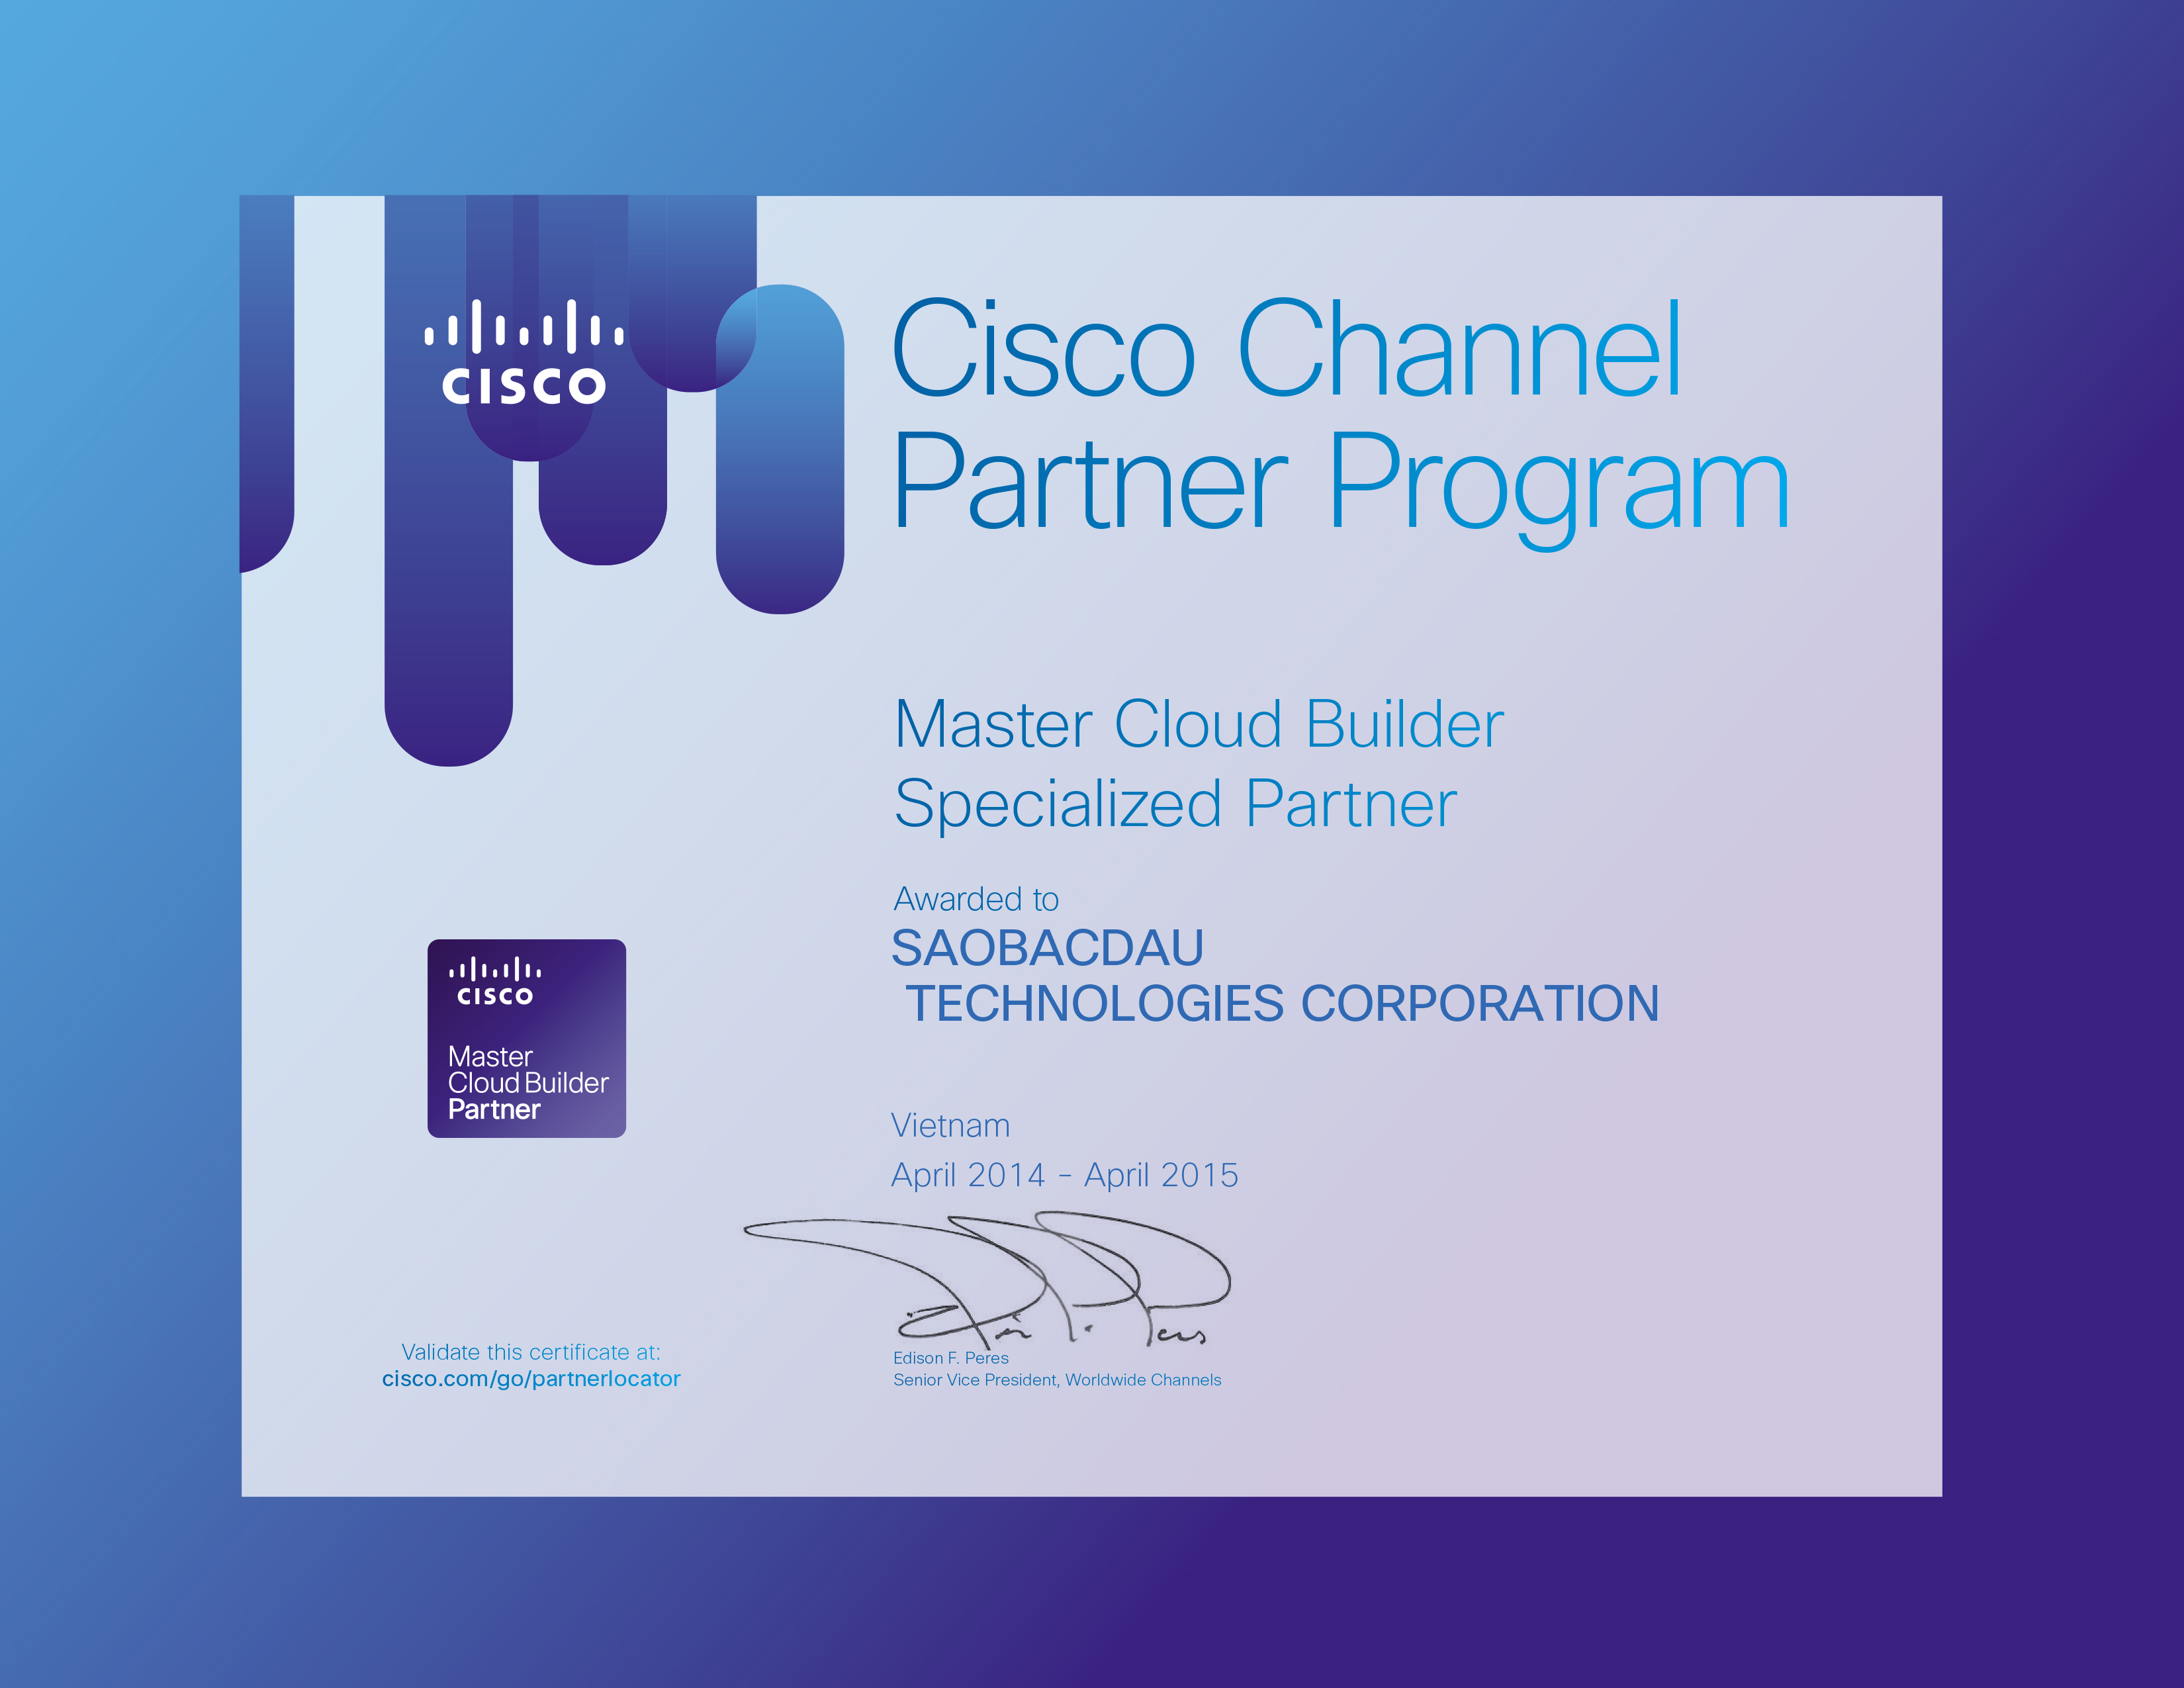 Sao Bac Dau became the first and only company in Vietnam certified CLOUD MASTER BUILDER PARTNER of Cisco